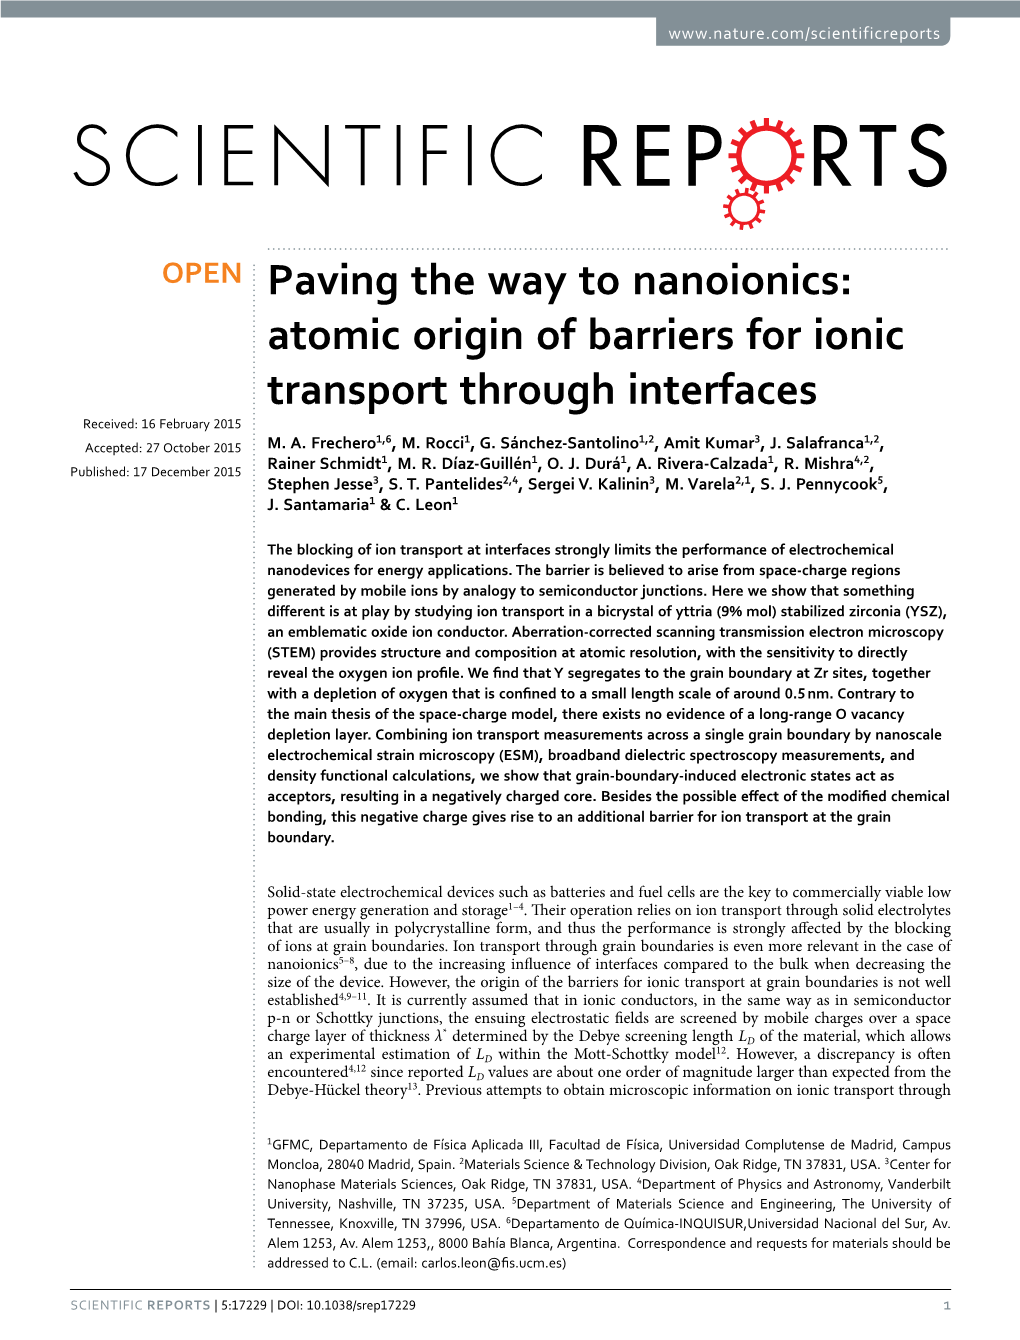 Atomic Origin of Barriers for Ionic Transport Through Interfaces Received: 16 February 2015 1,6 1 1,2 3 1,2 Accepted: 27 October 2015 M